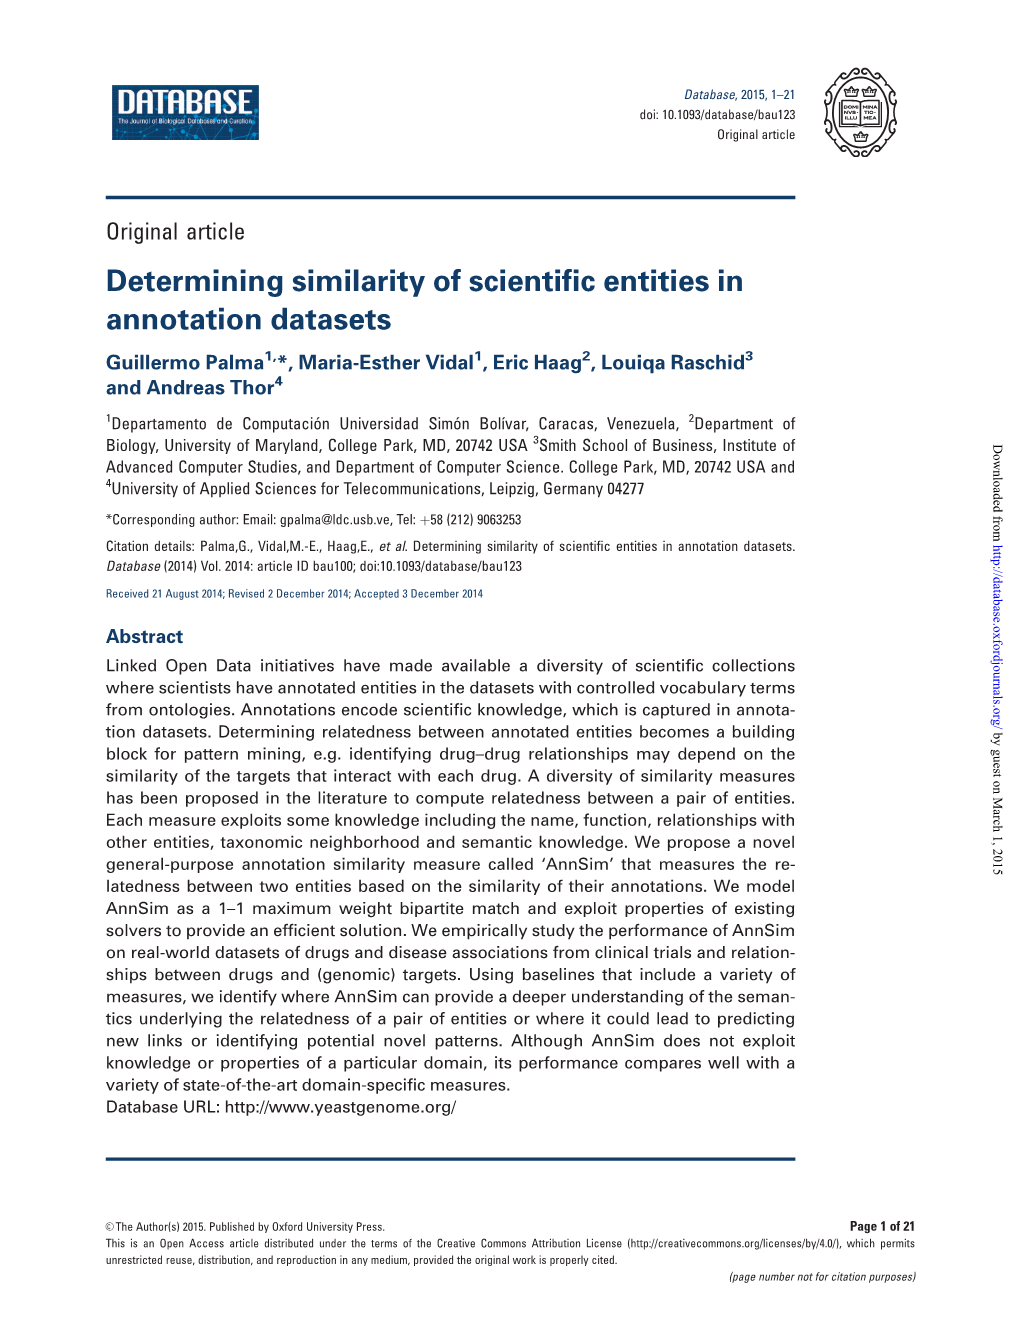 Determining Similarity of Scientific Entities in Annotation Datasets Guillermo Palma1,*, Maria-Esther Vidal1, Eric Haag2, Louiqa Raschid3 and Andreas Thor4